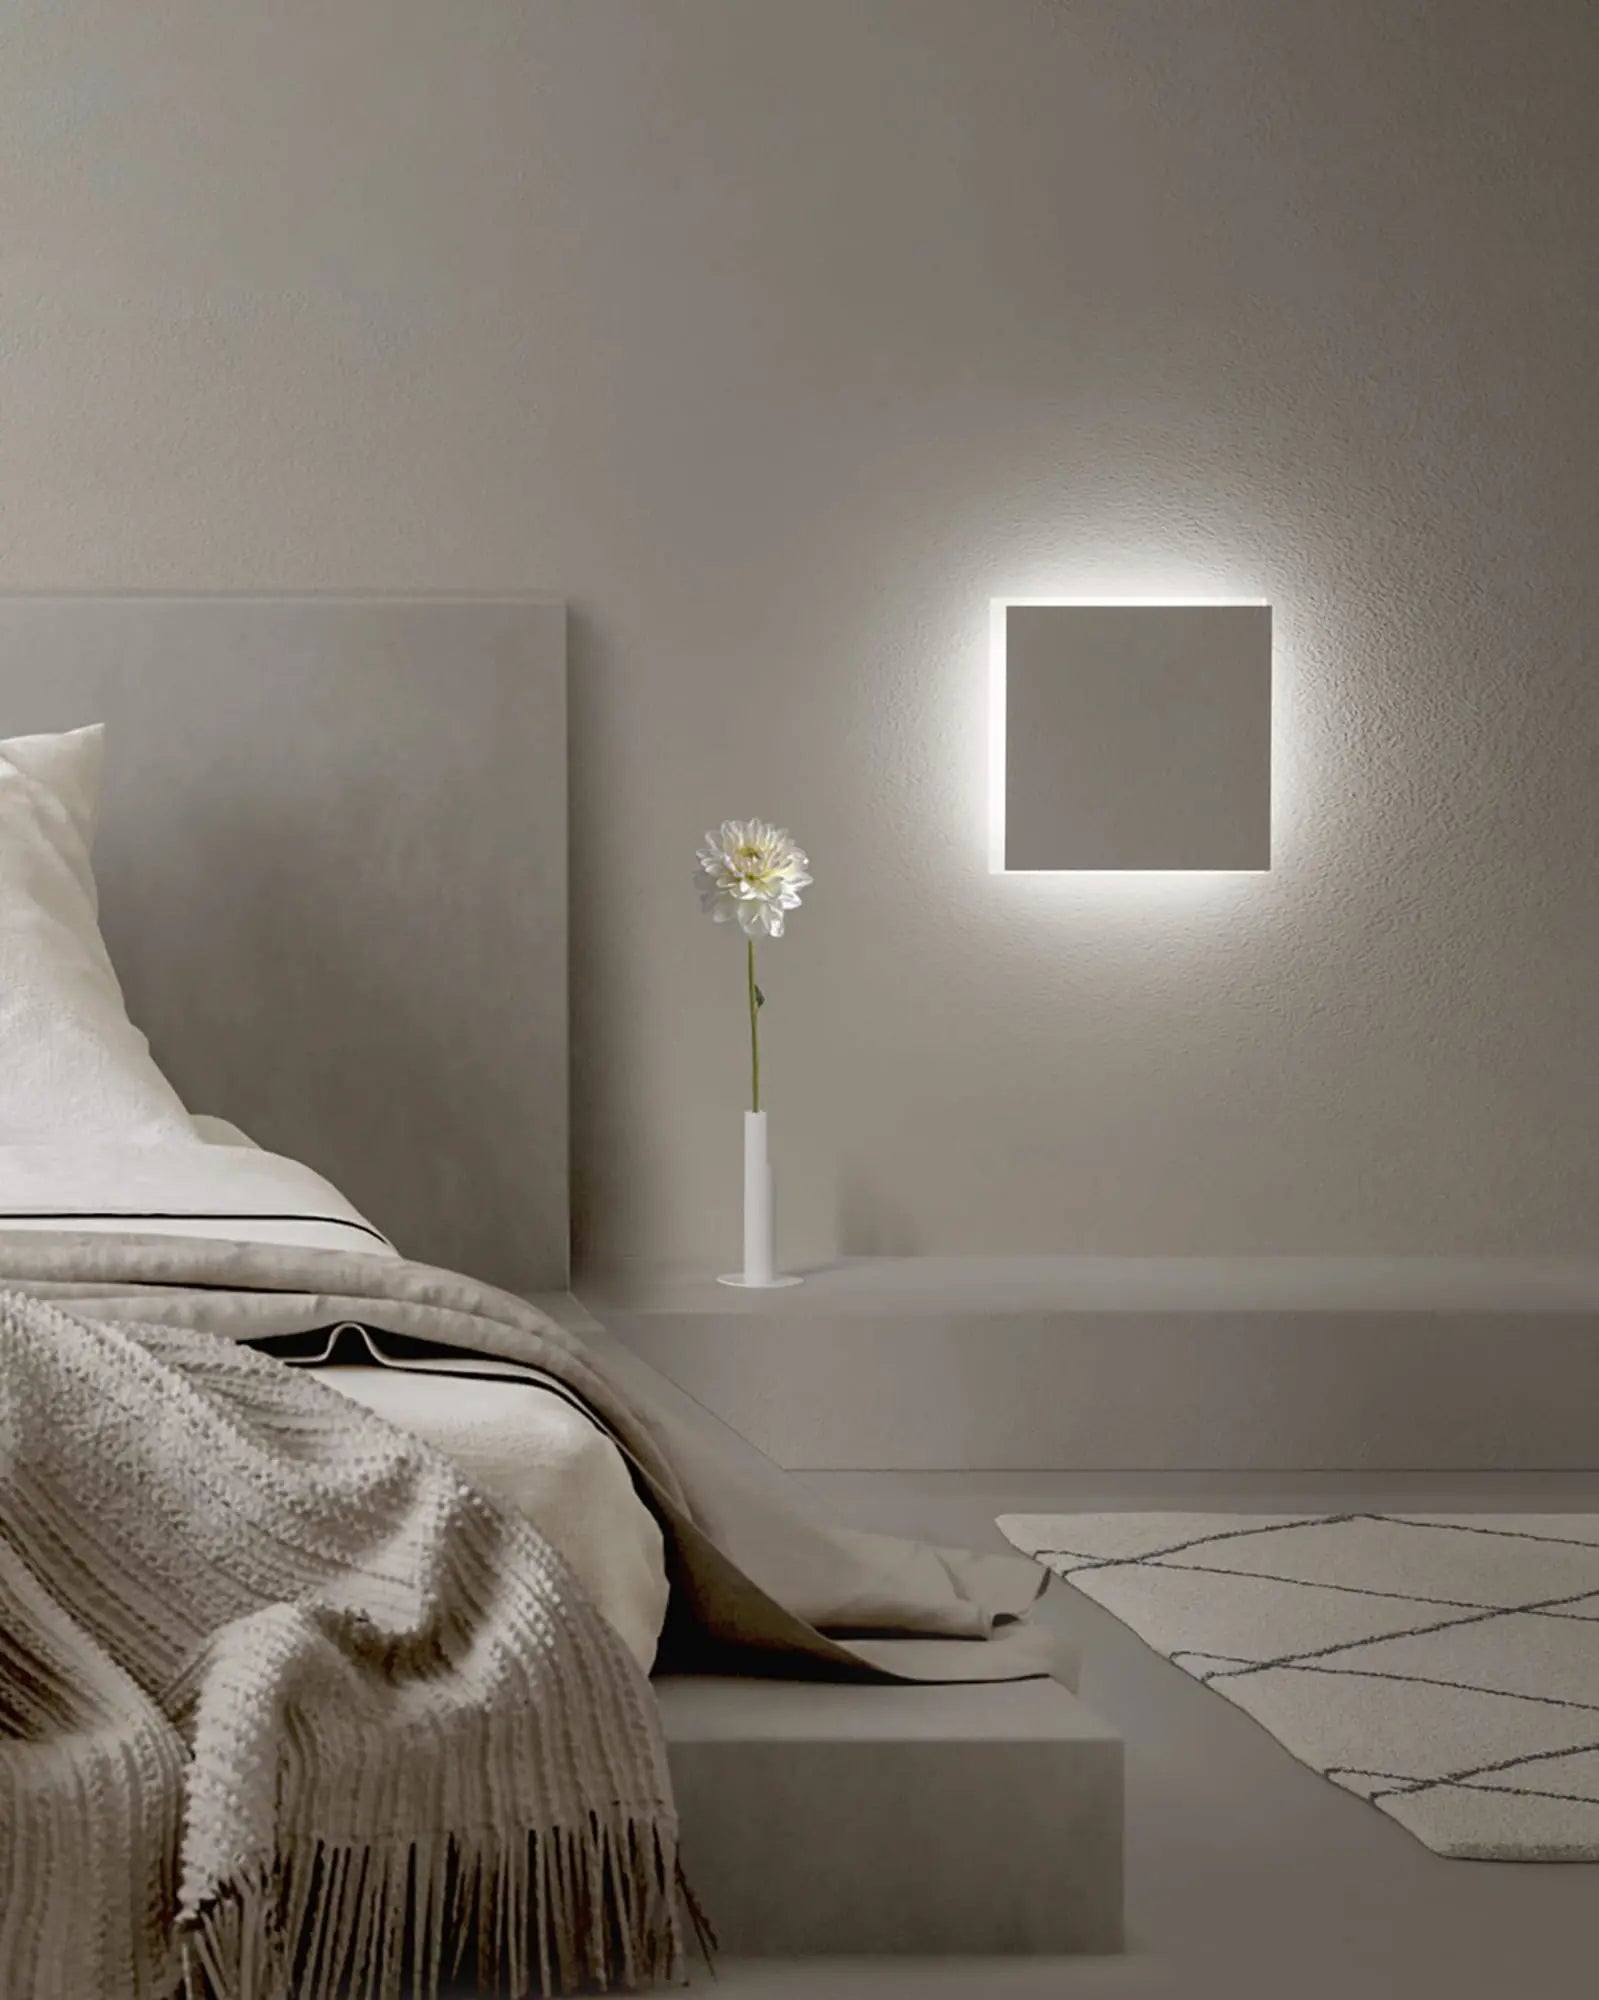 Aldecimo made in Italy square flat wall light in a bedroom